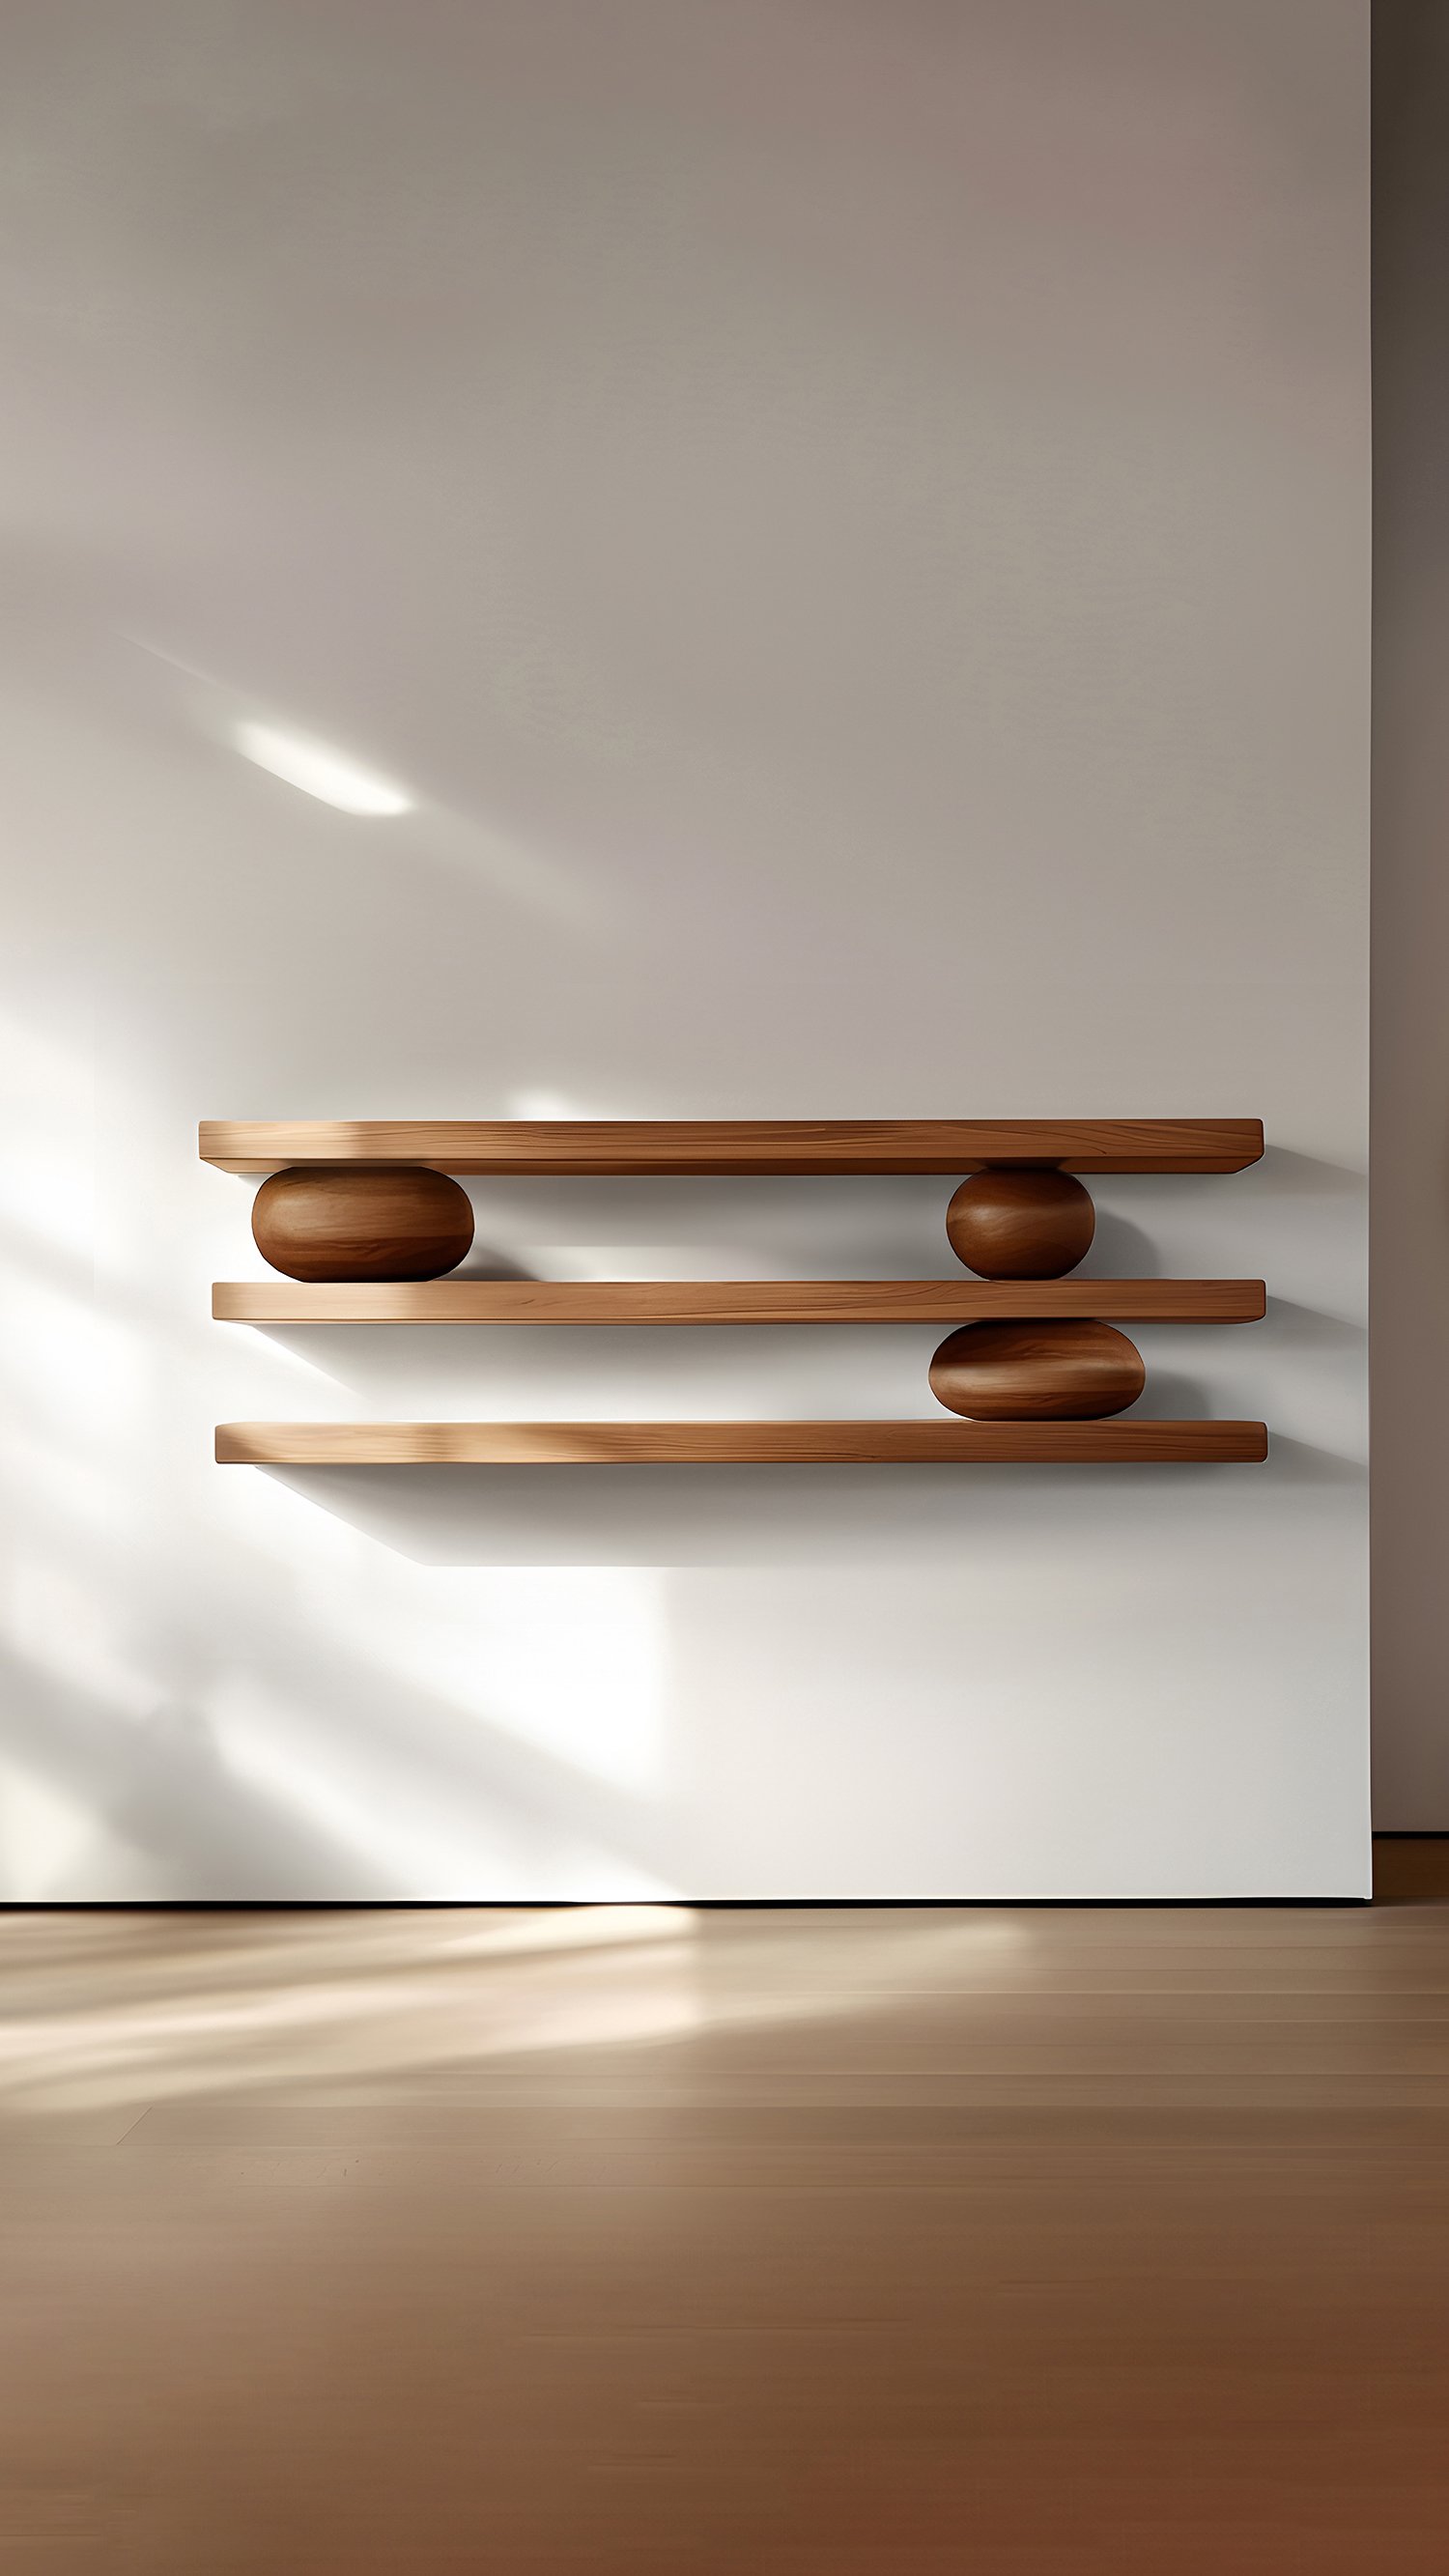 Set of Three Floating Shelves with Three Sculptural Wooden Pebble Accents, Sereno by Joel Escalona — 5.jpg